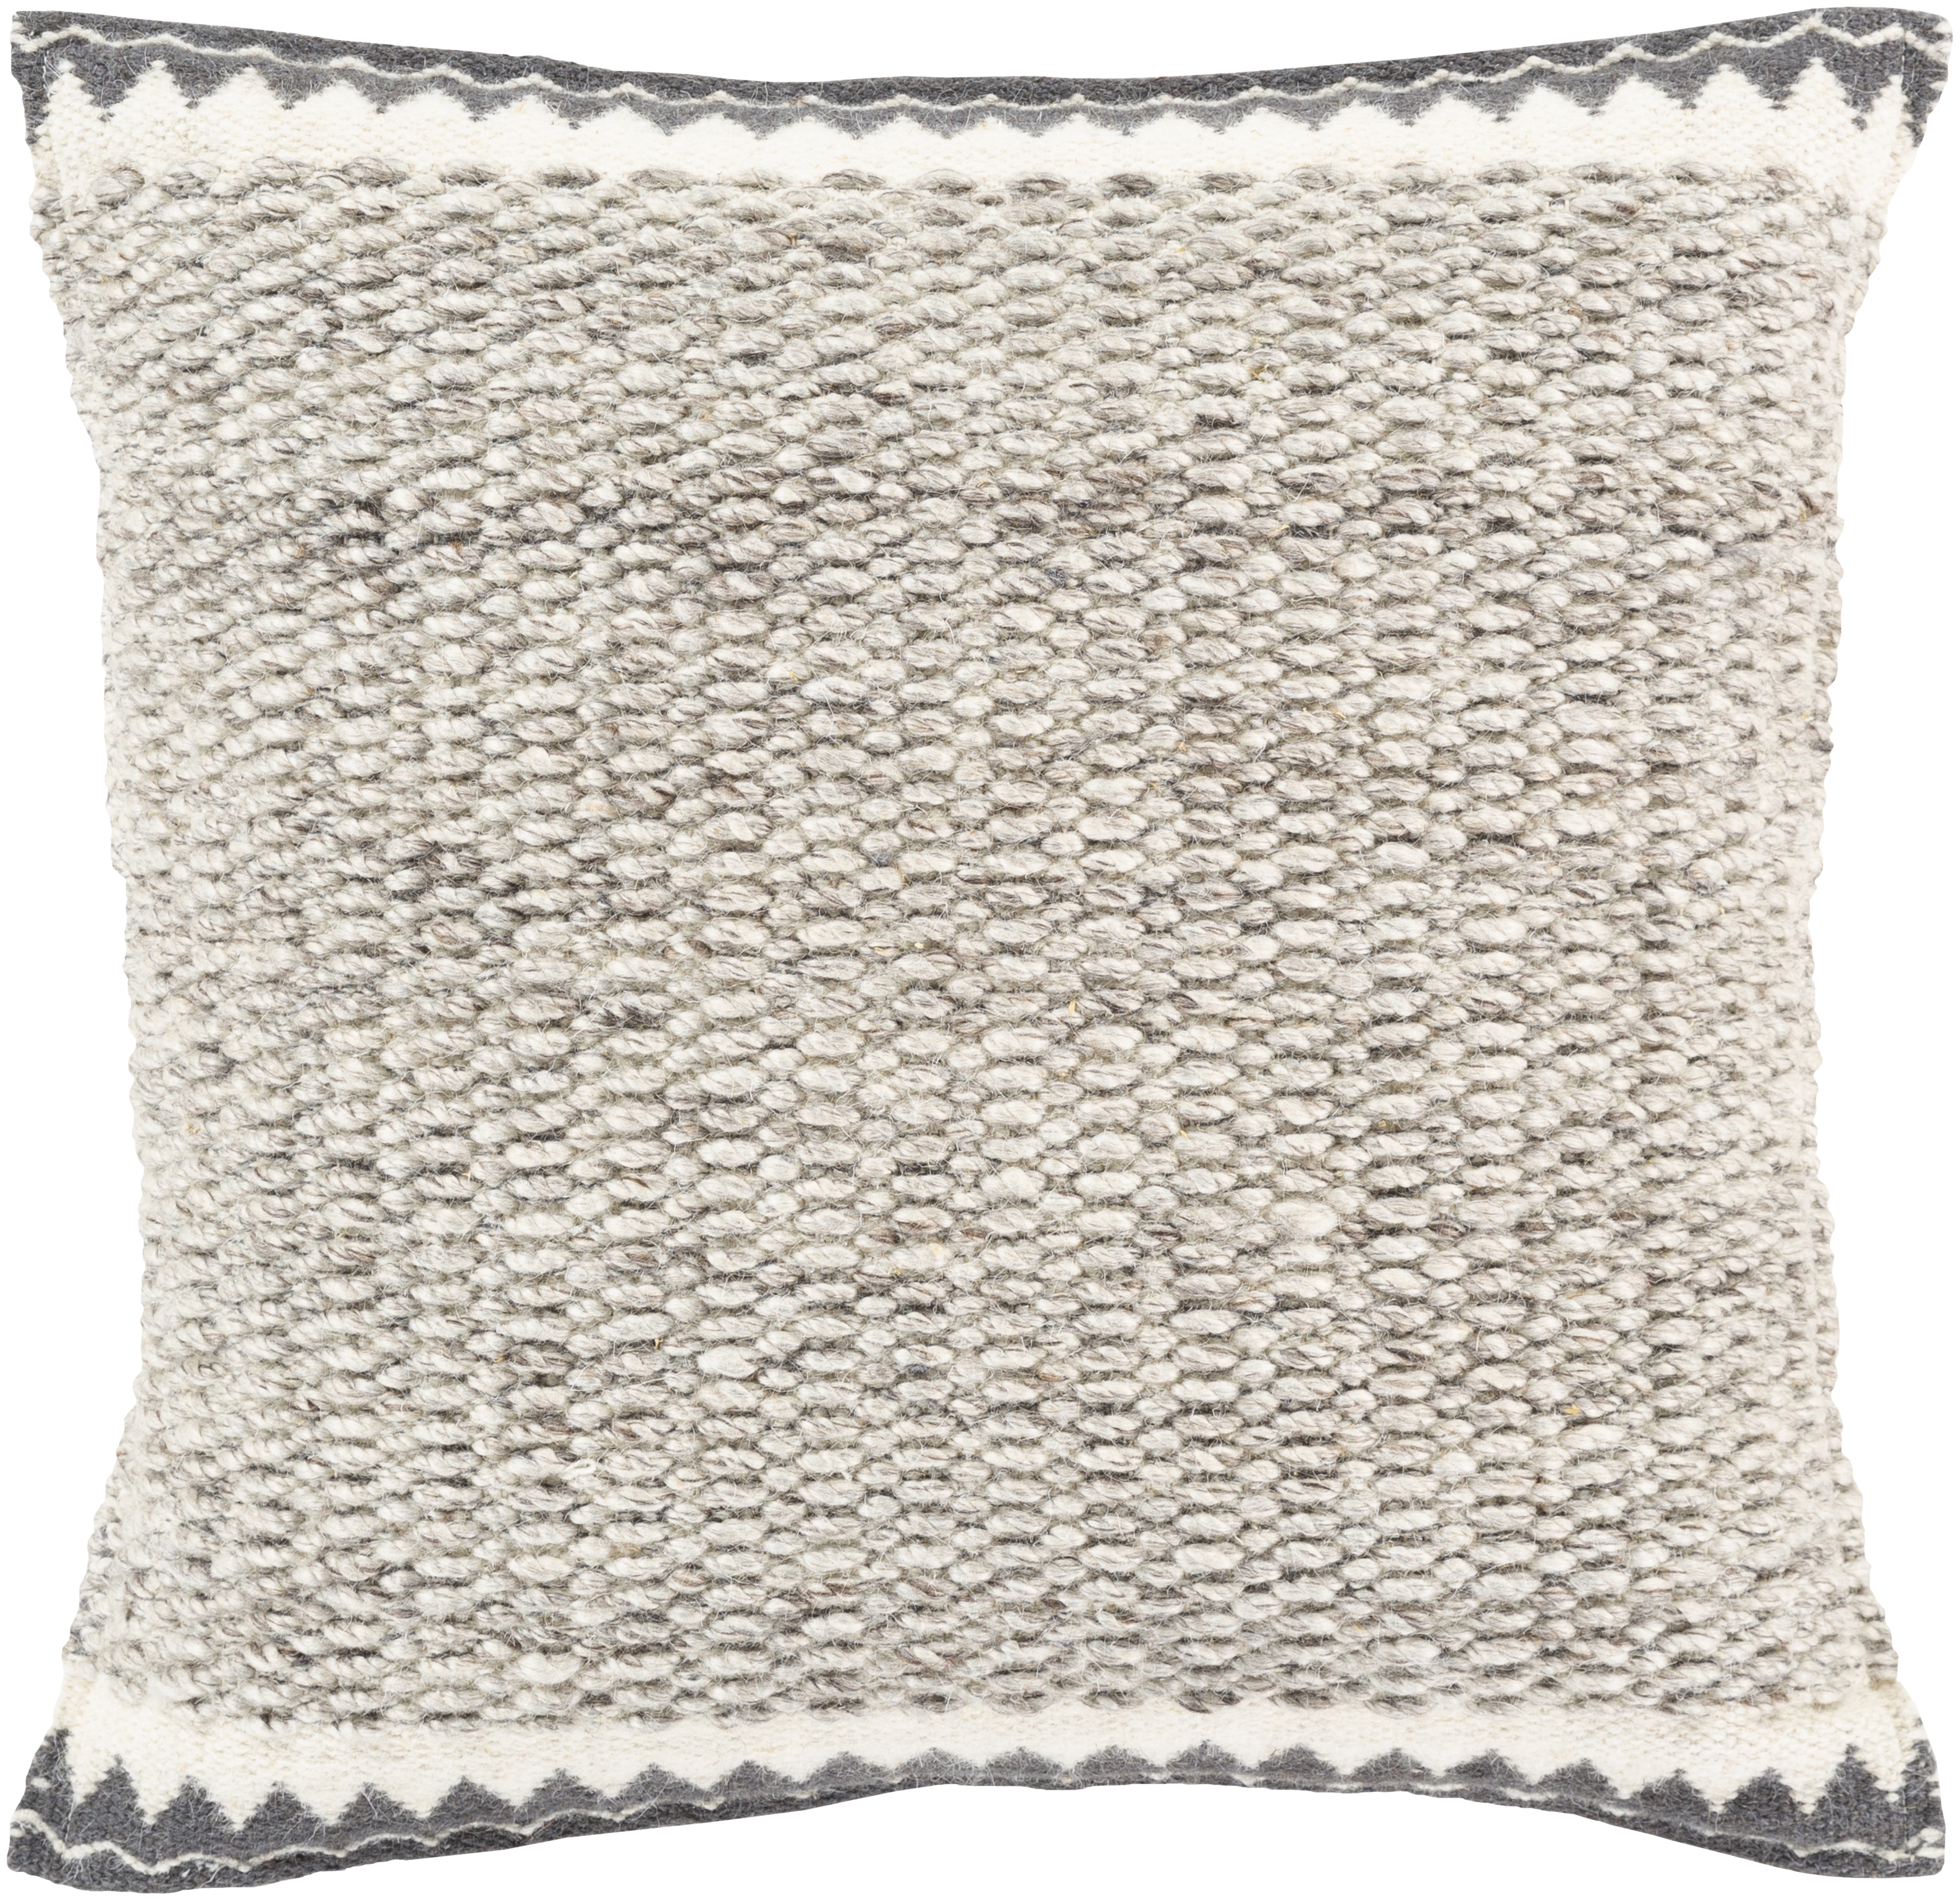 Faroe Throw Pillow, 18" x 18", with down insert - Image 0